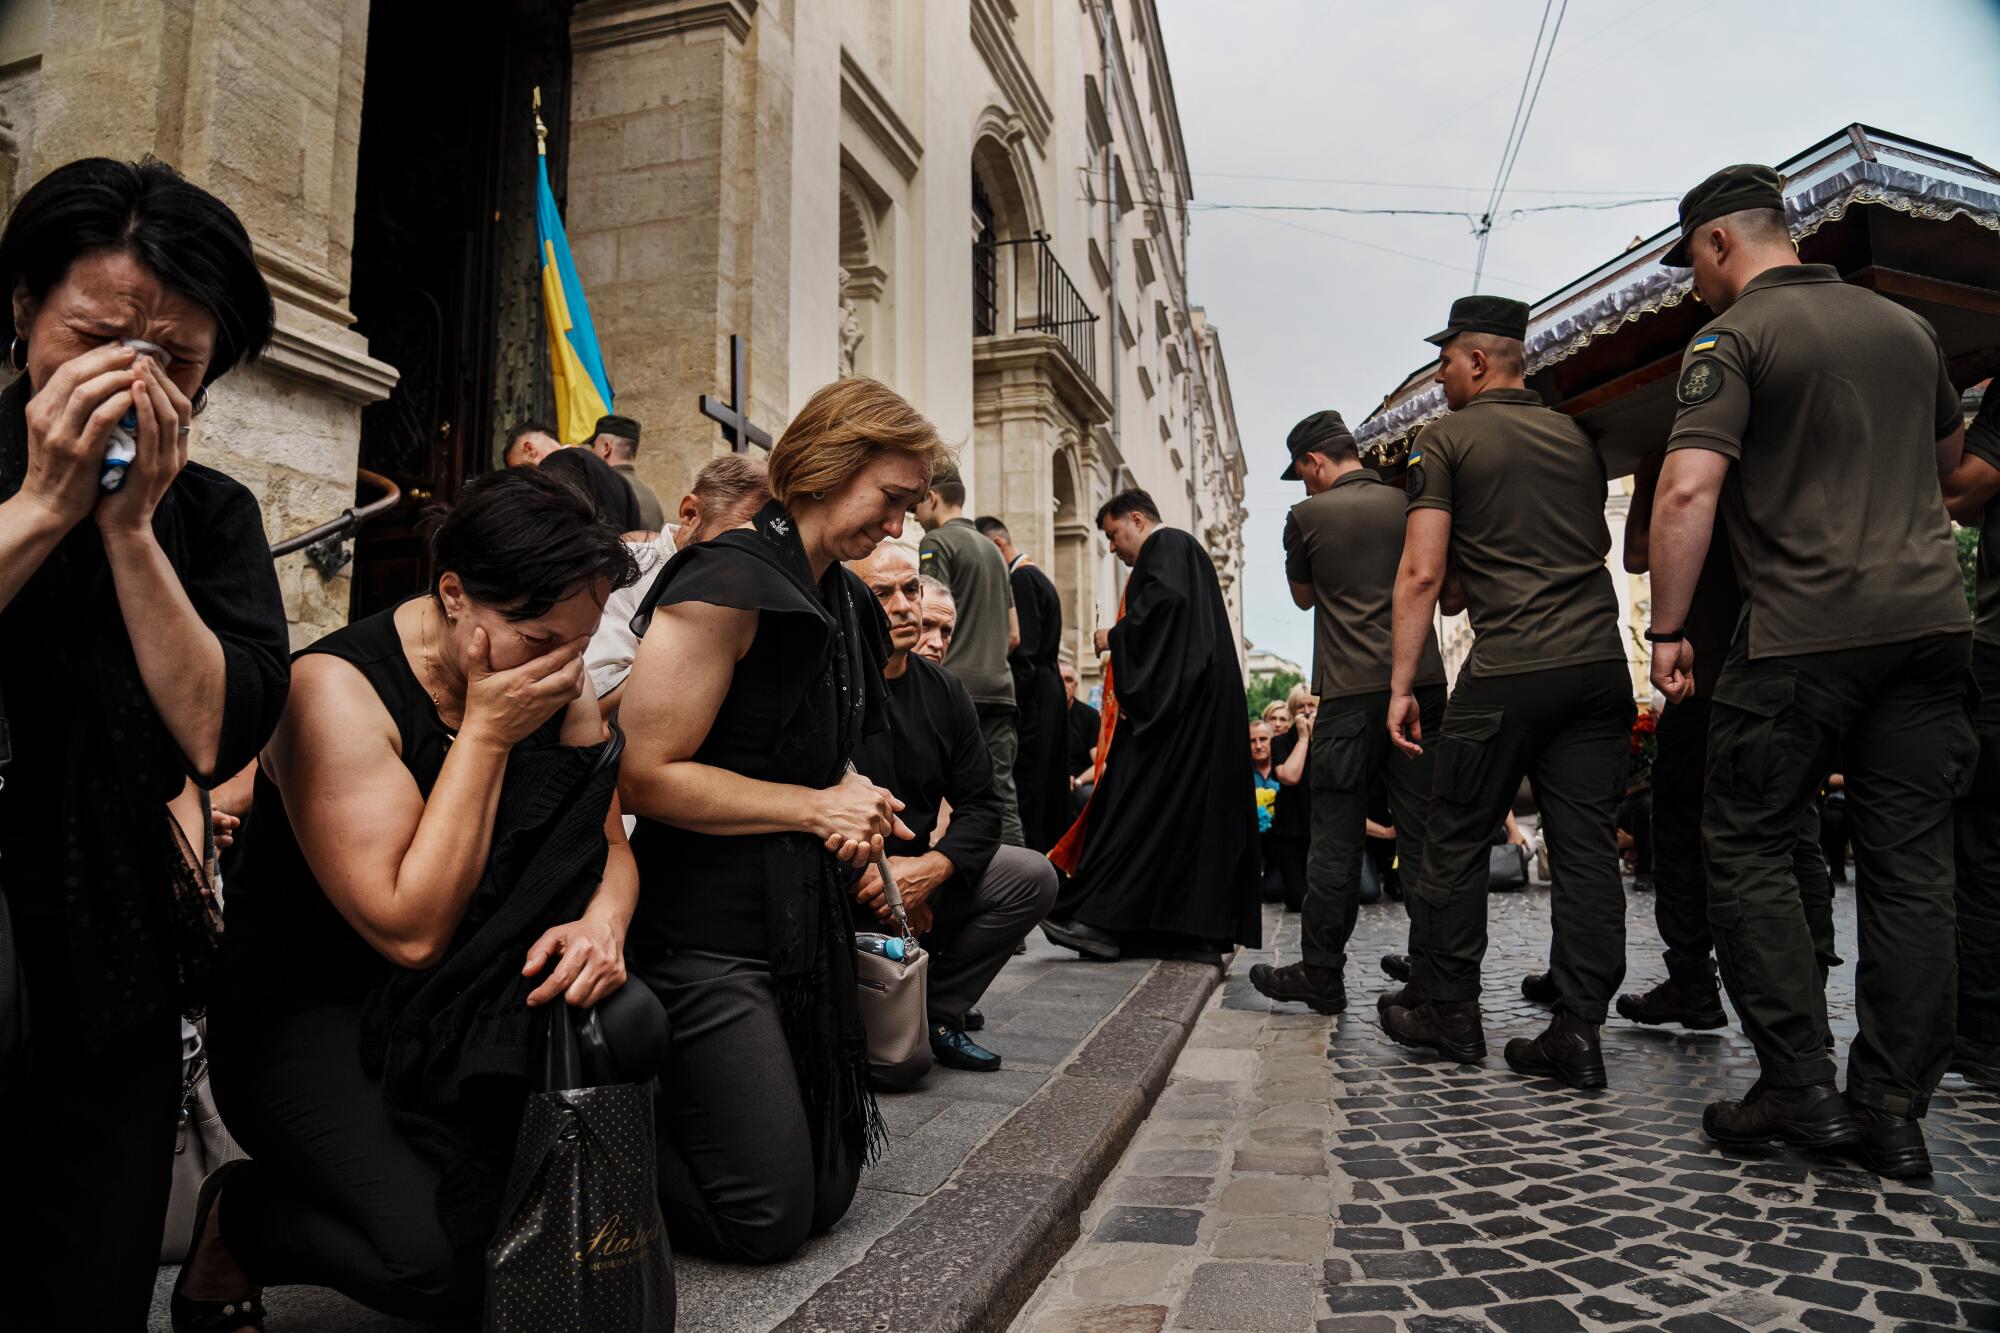 Mourners kneel and weep as a funeral procession, with soldiers carrying a casket, passes by 